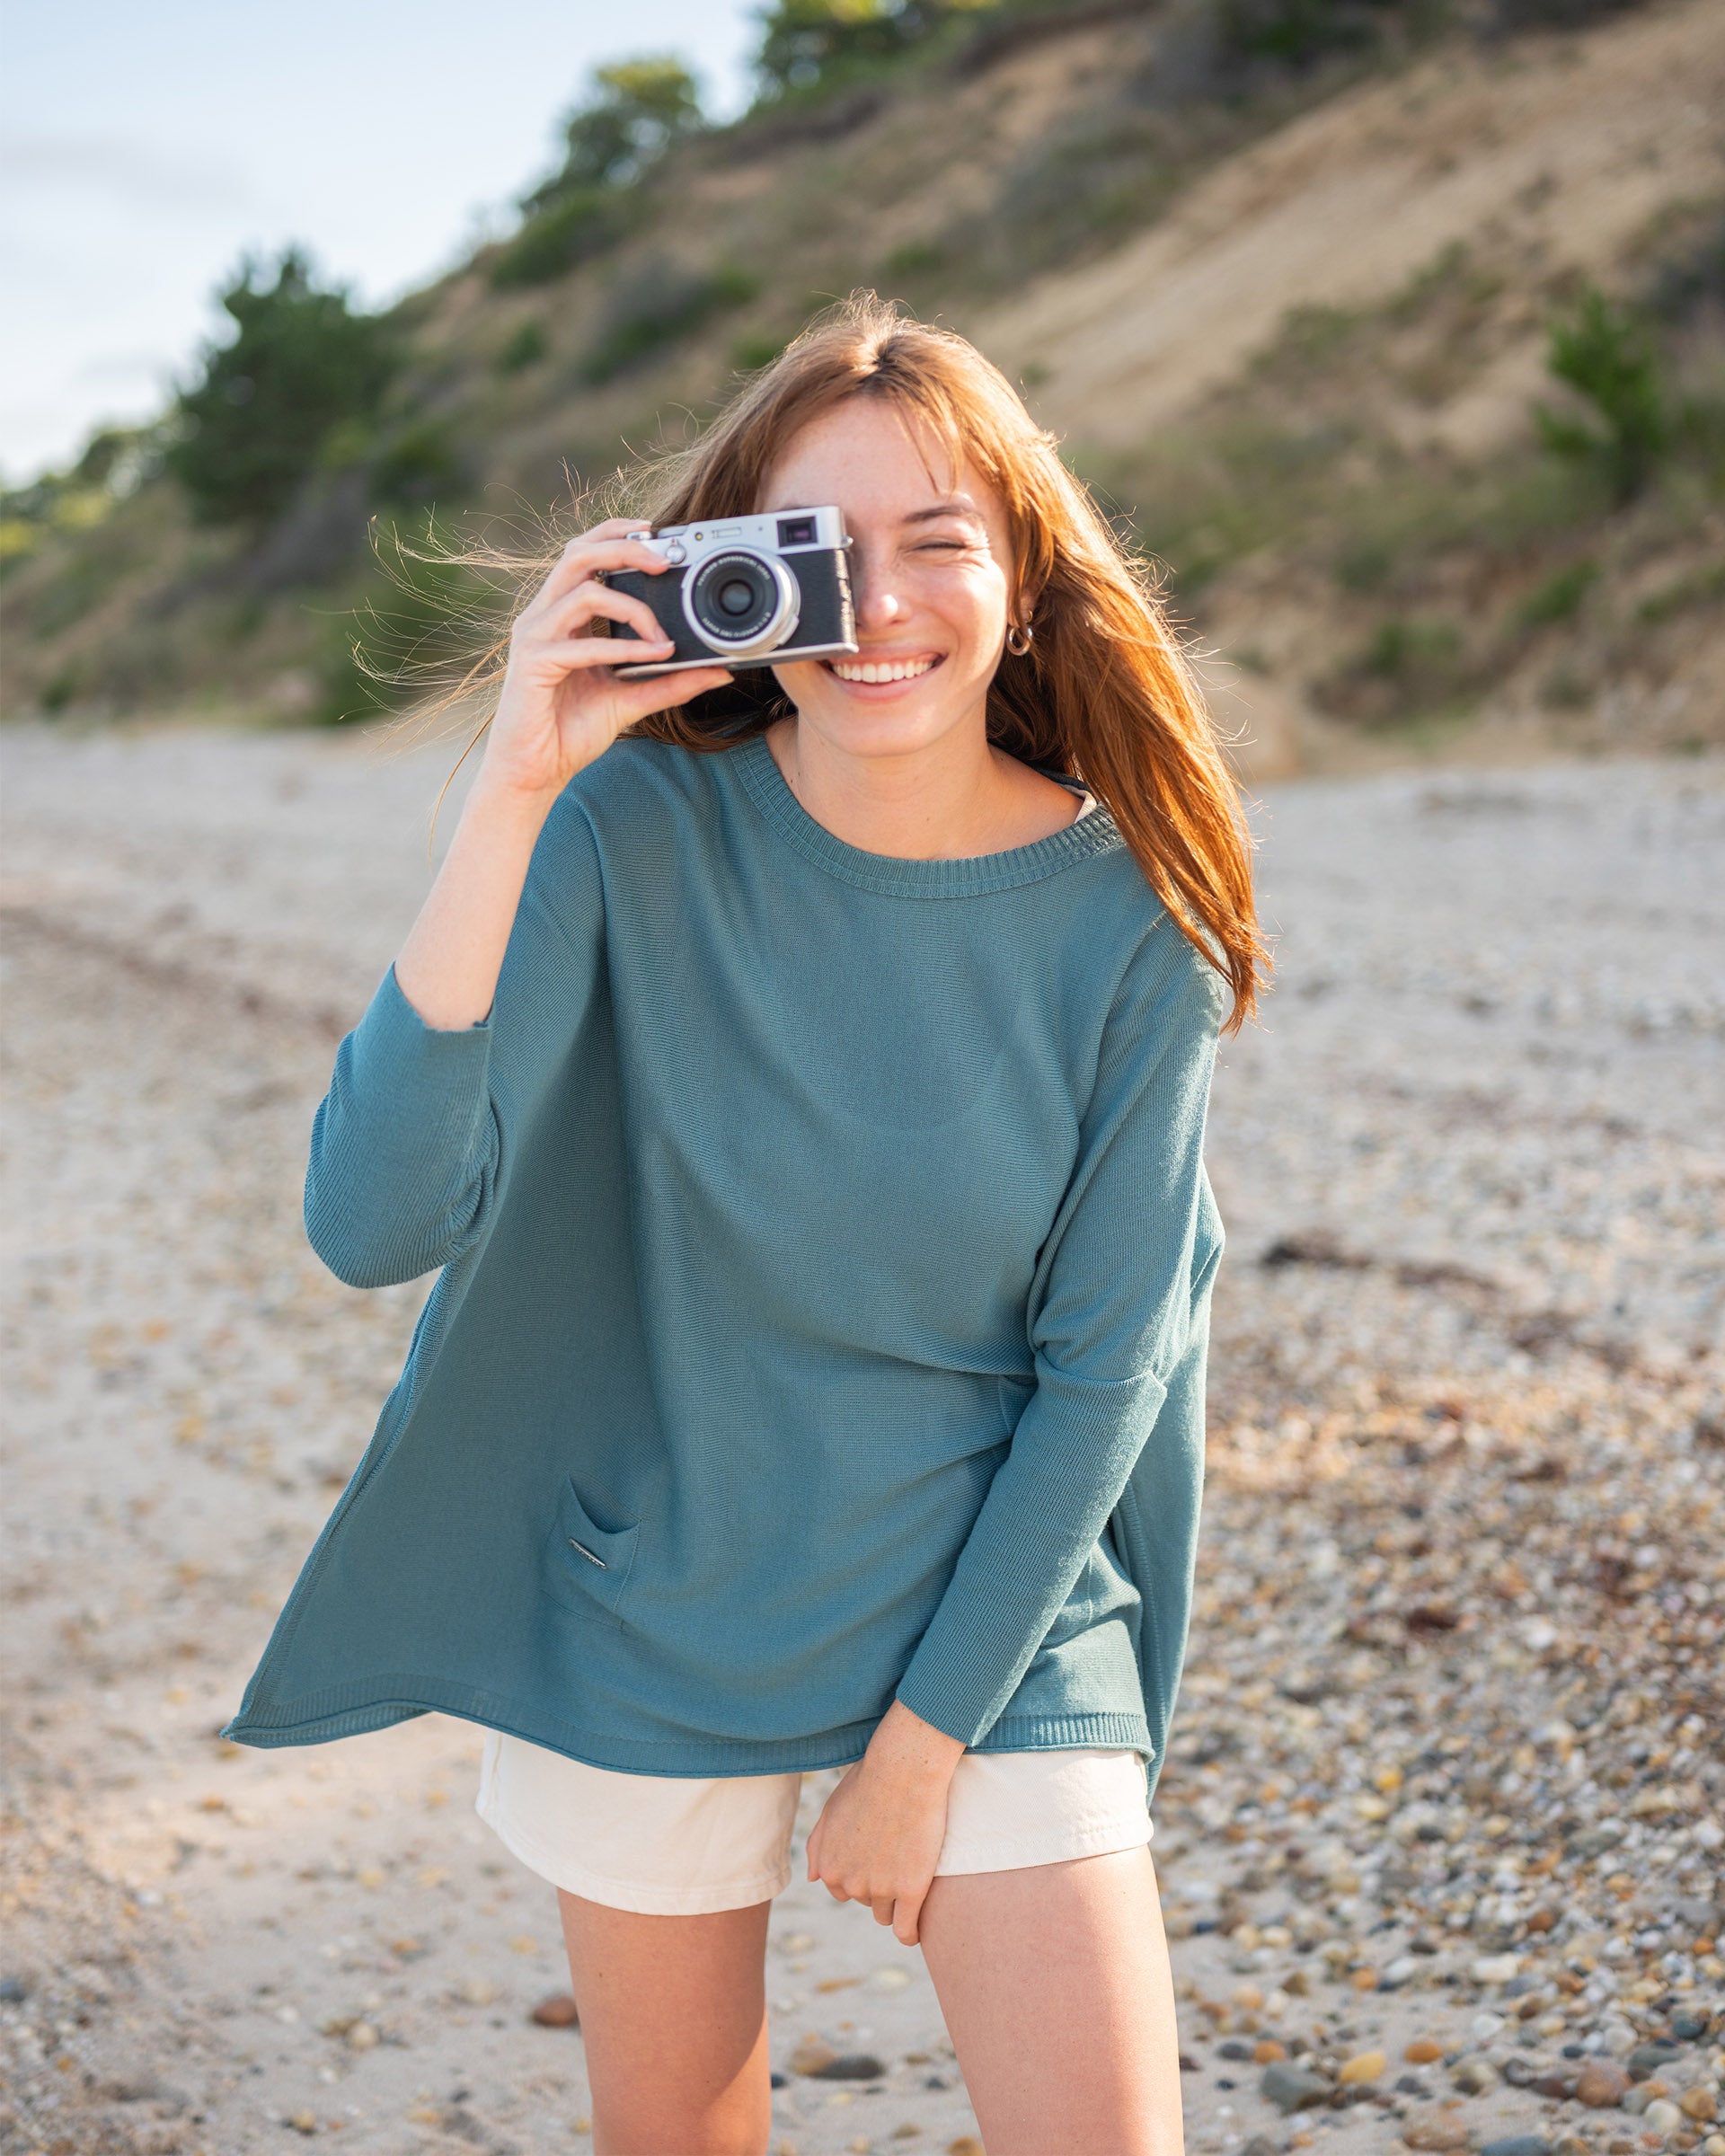 female wearing greenish blue sweater standing on the beach holding a camera